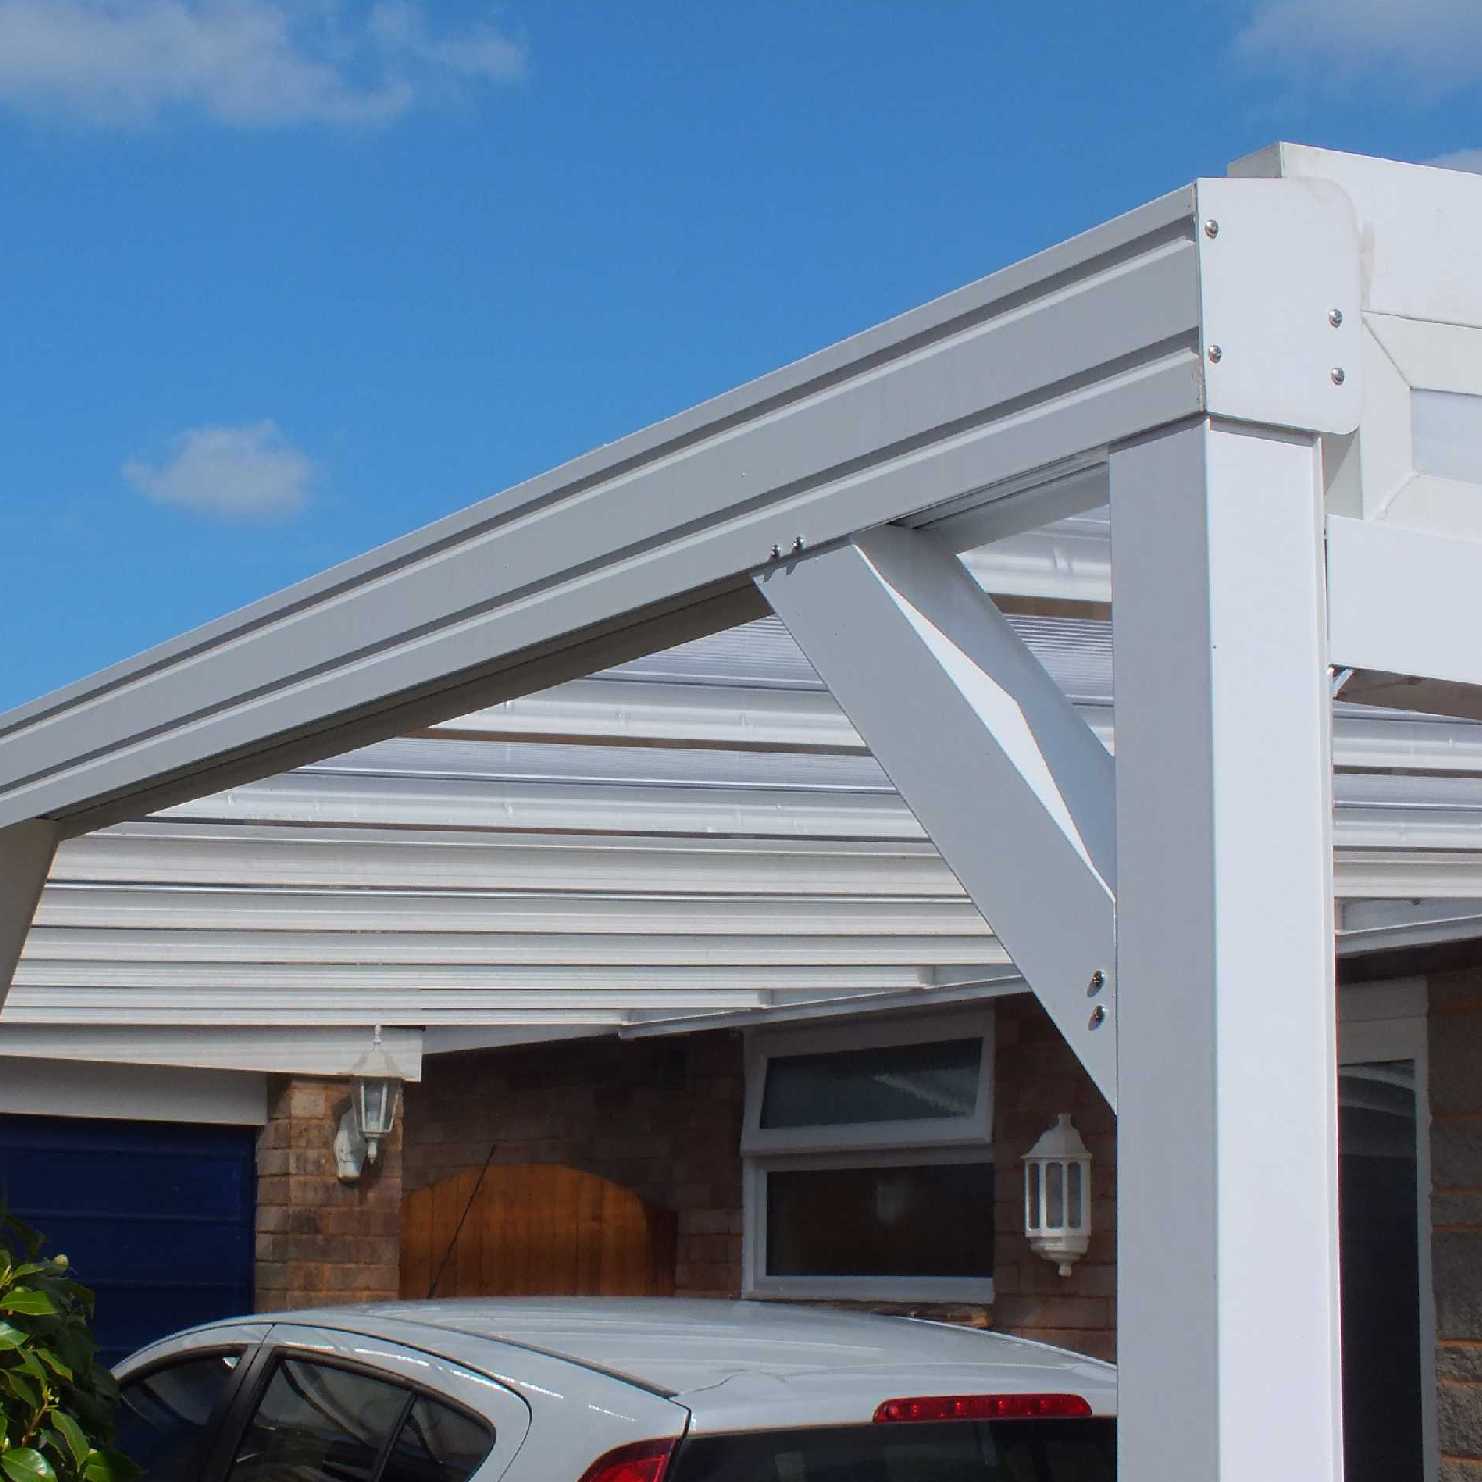 Buy Omega Smart Lean-To Canopy, White with 16mm Polycarbonate Glazing - 7.4m (W) x 2.5m (P), (4) Supporting Posts online today